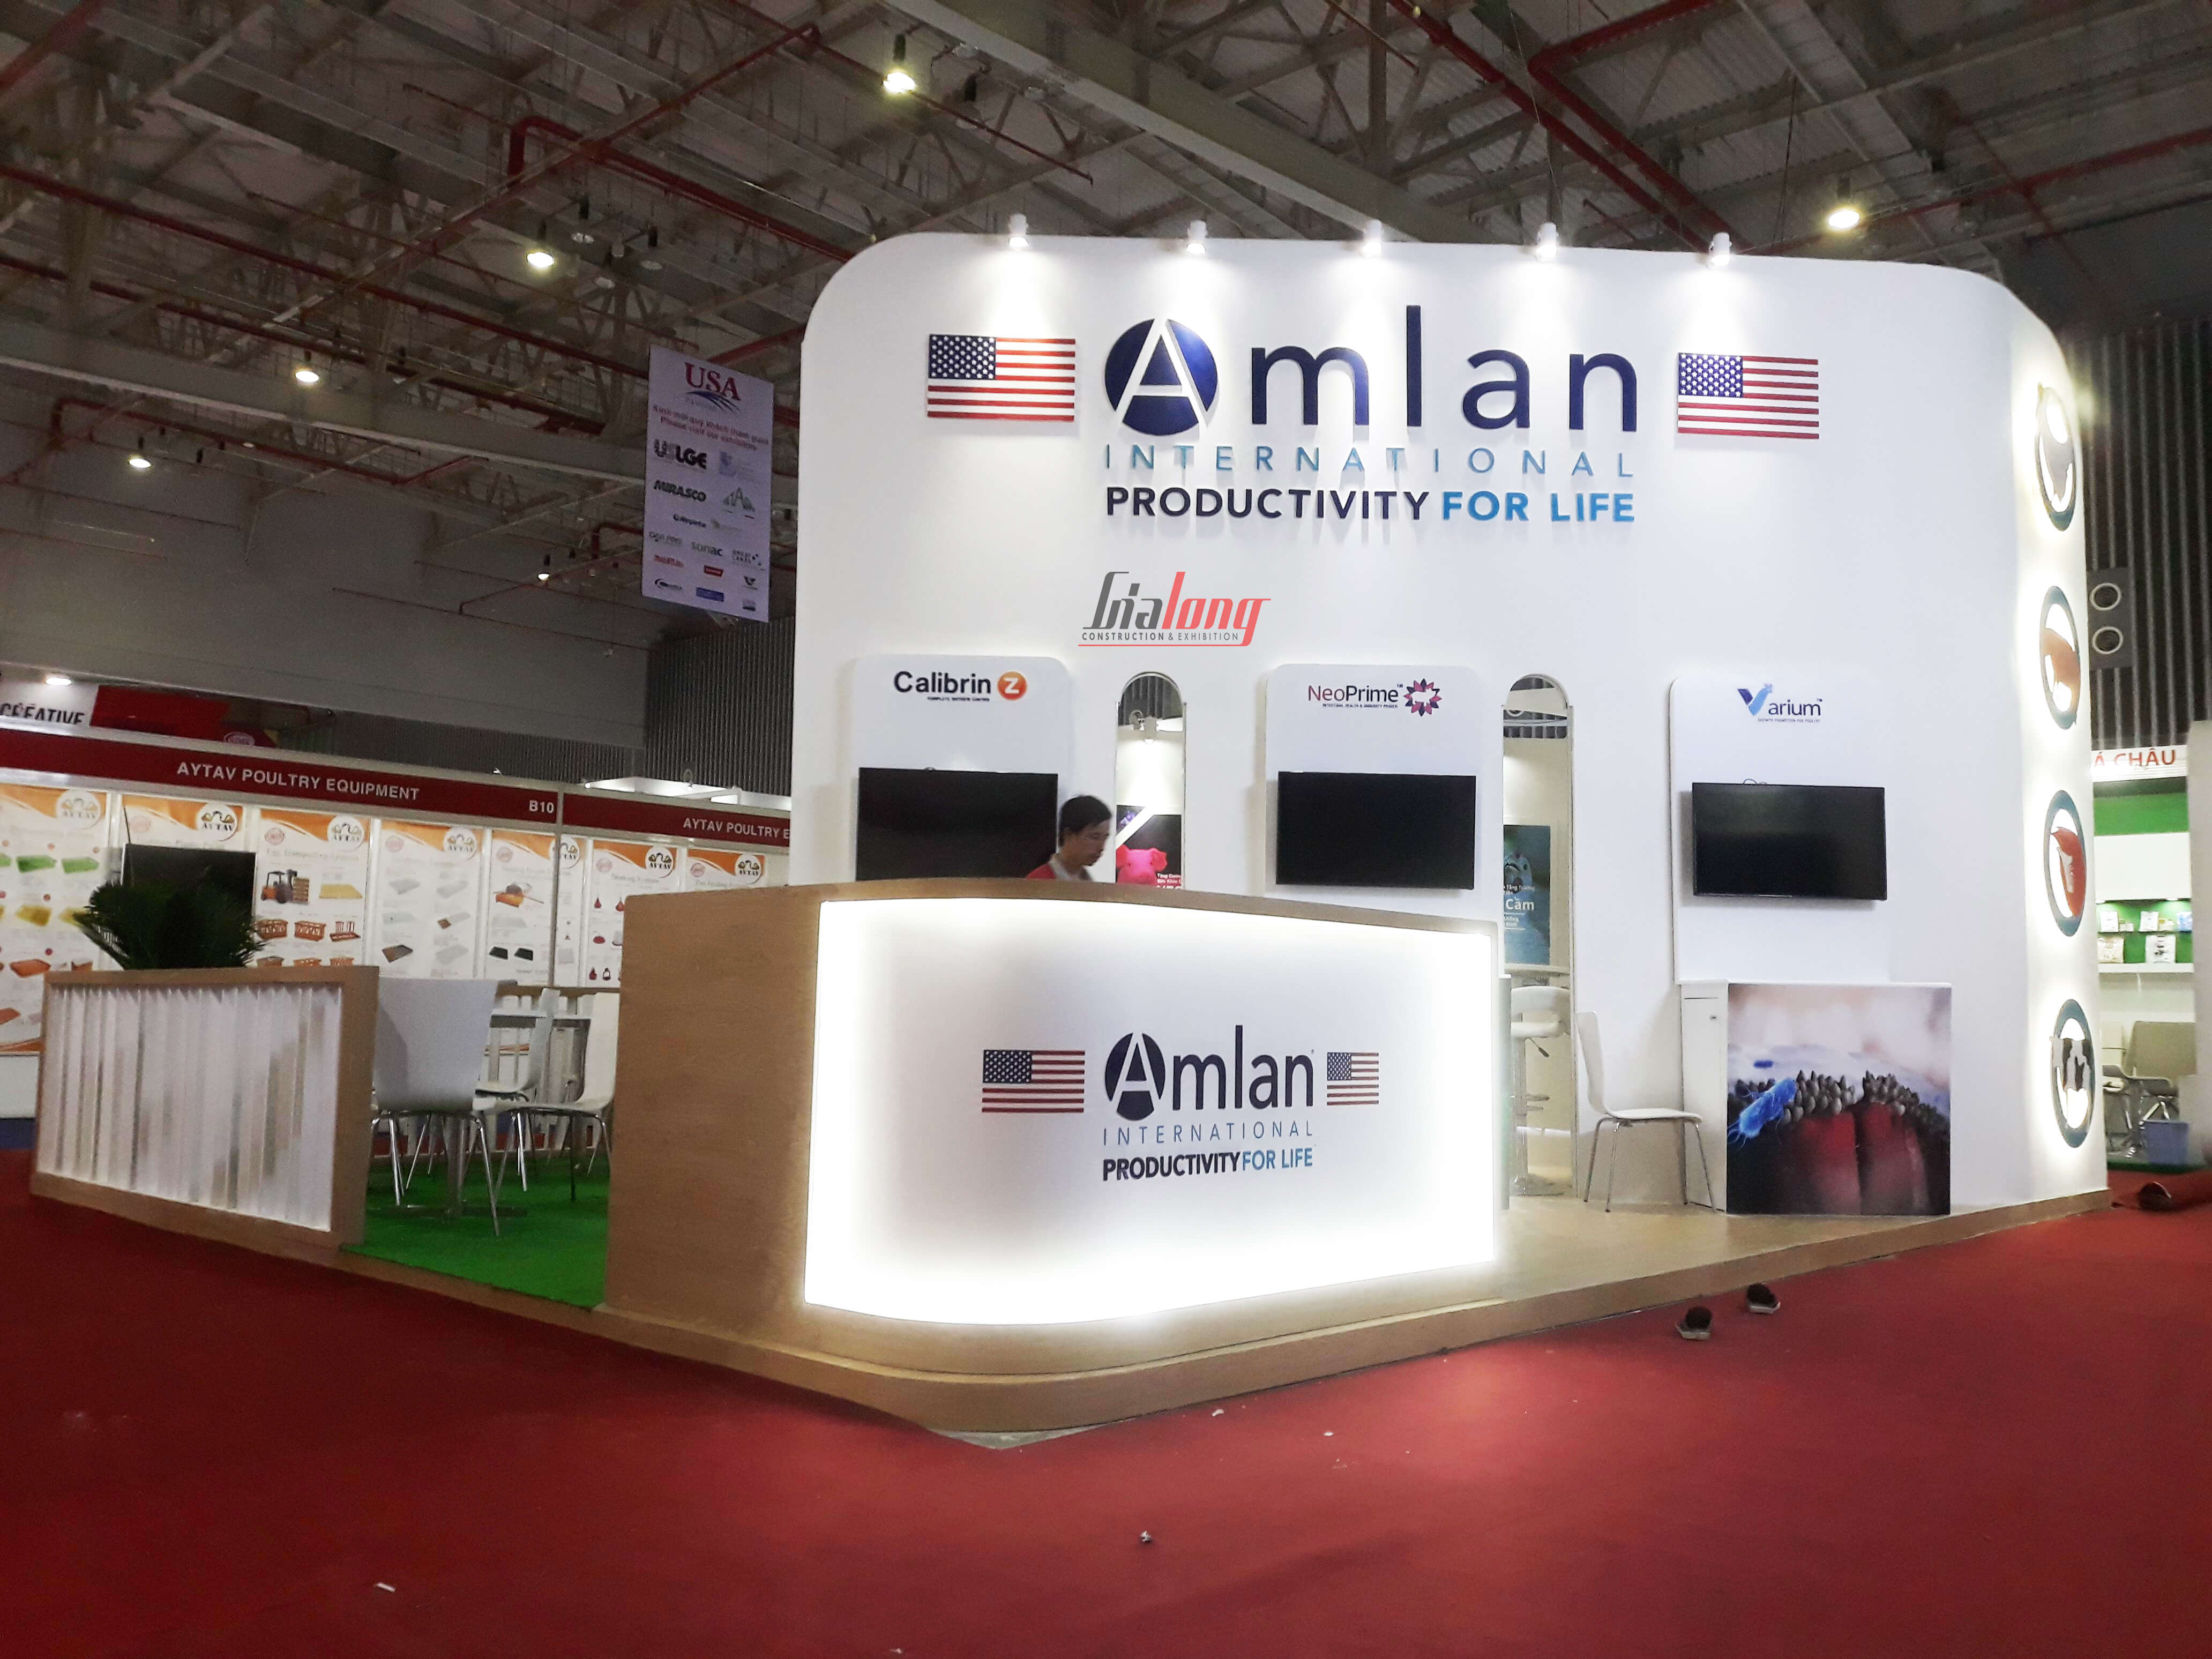 Amlan booth belonging to England has been completed by Gia Long.